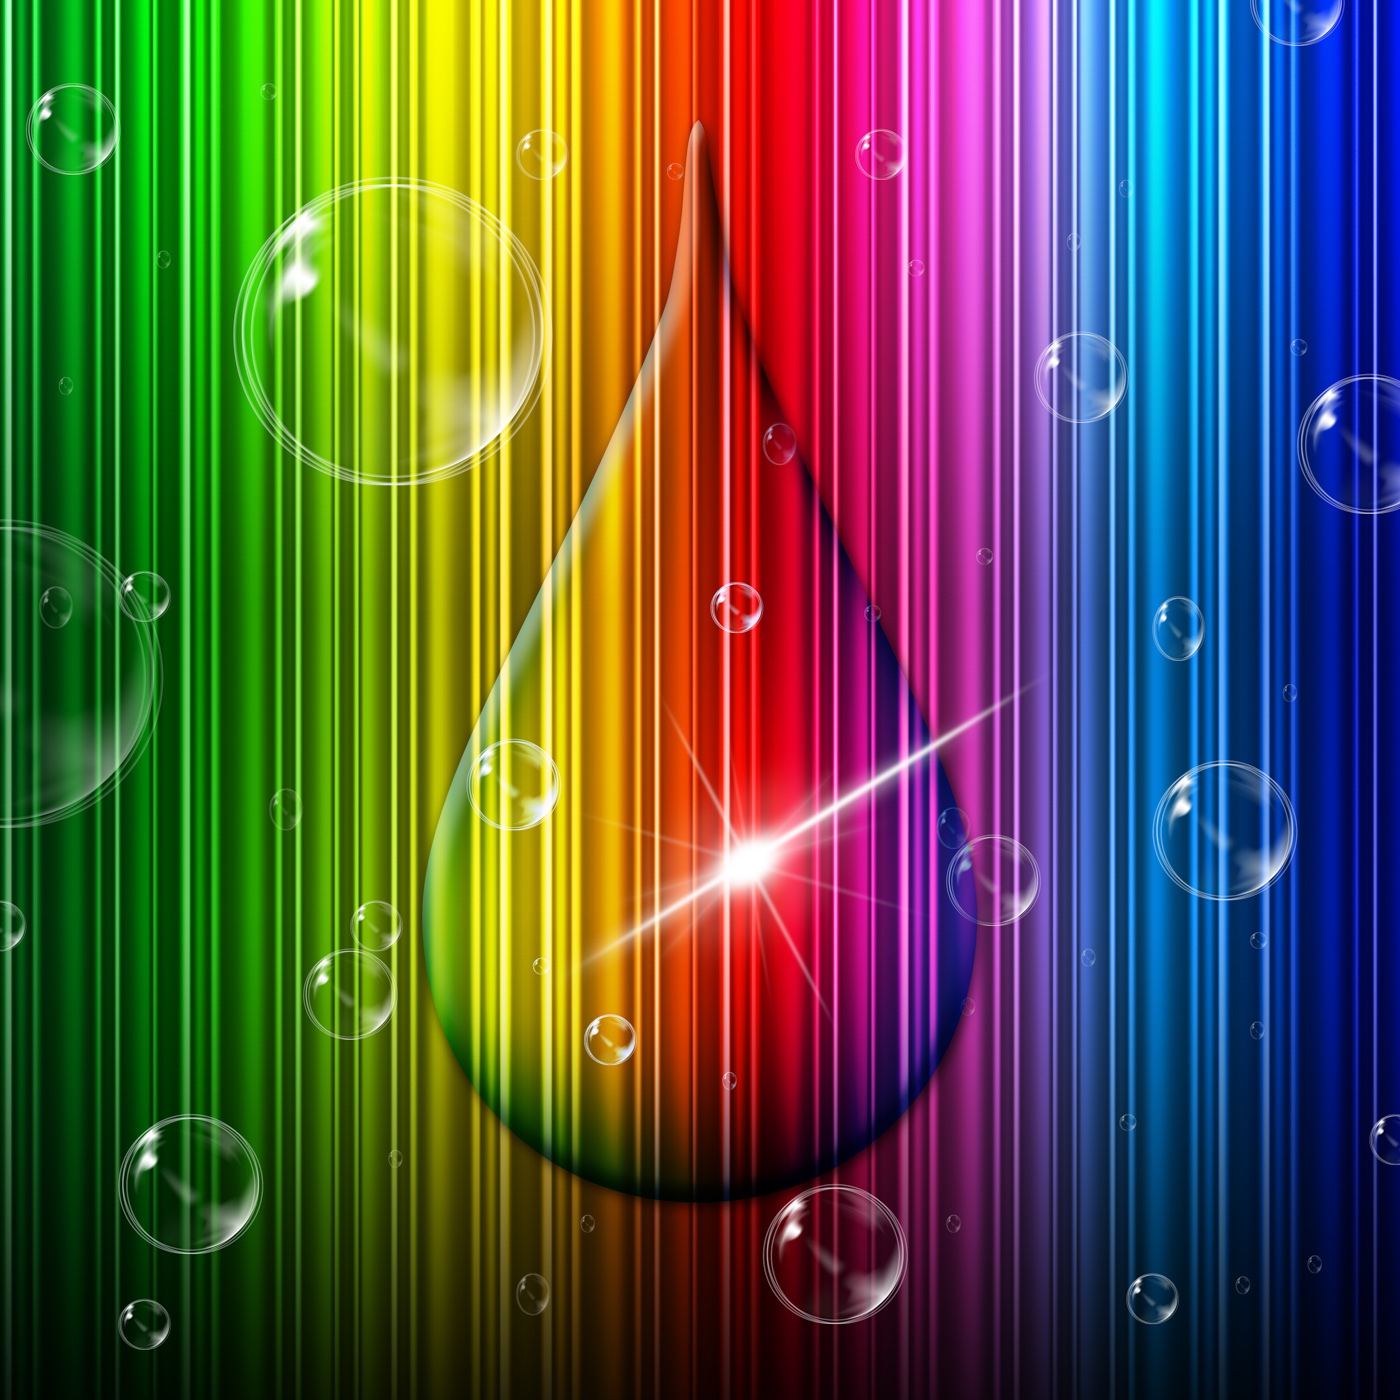 Rain Drop Indicates Color Swatch And Backgrounds, Abstract, Coloursplash, Template, Spectrum, HQ Photo